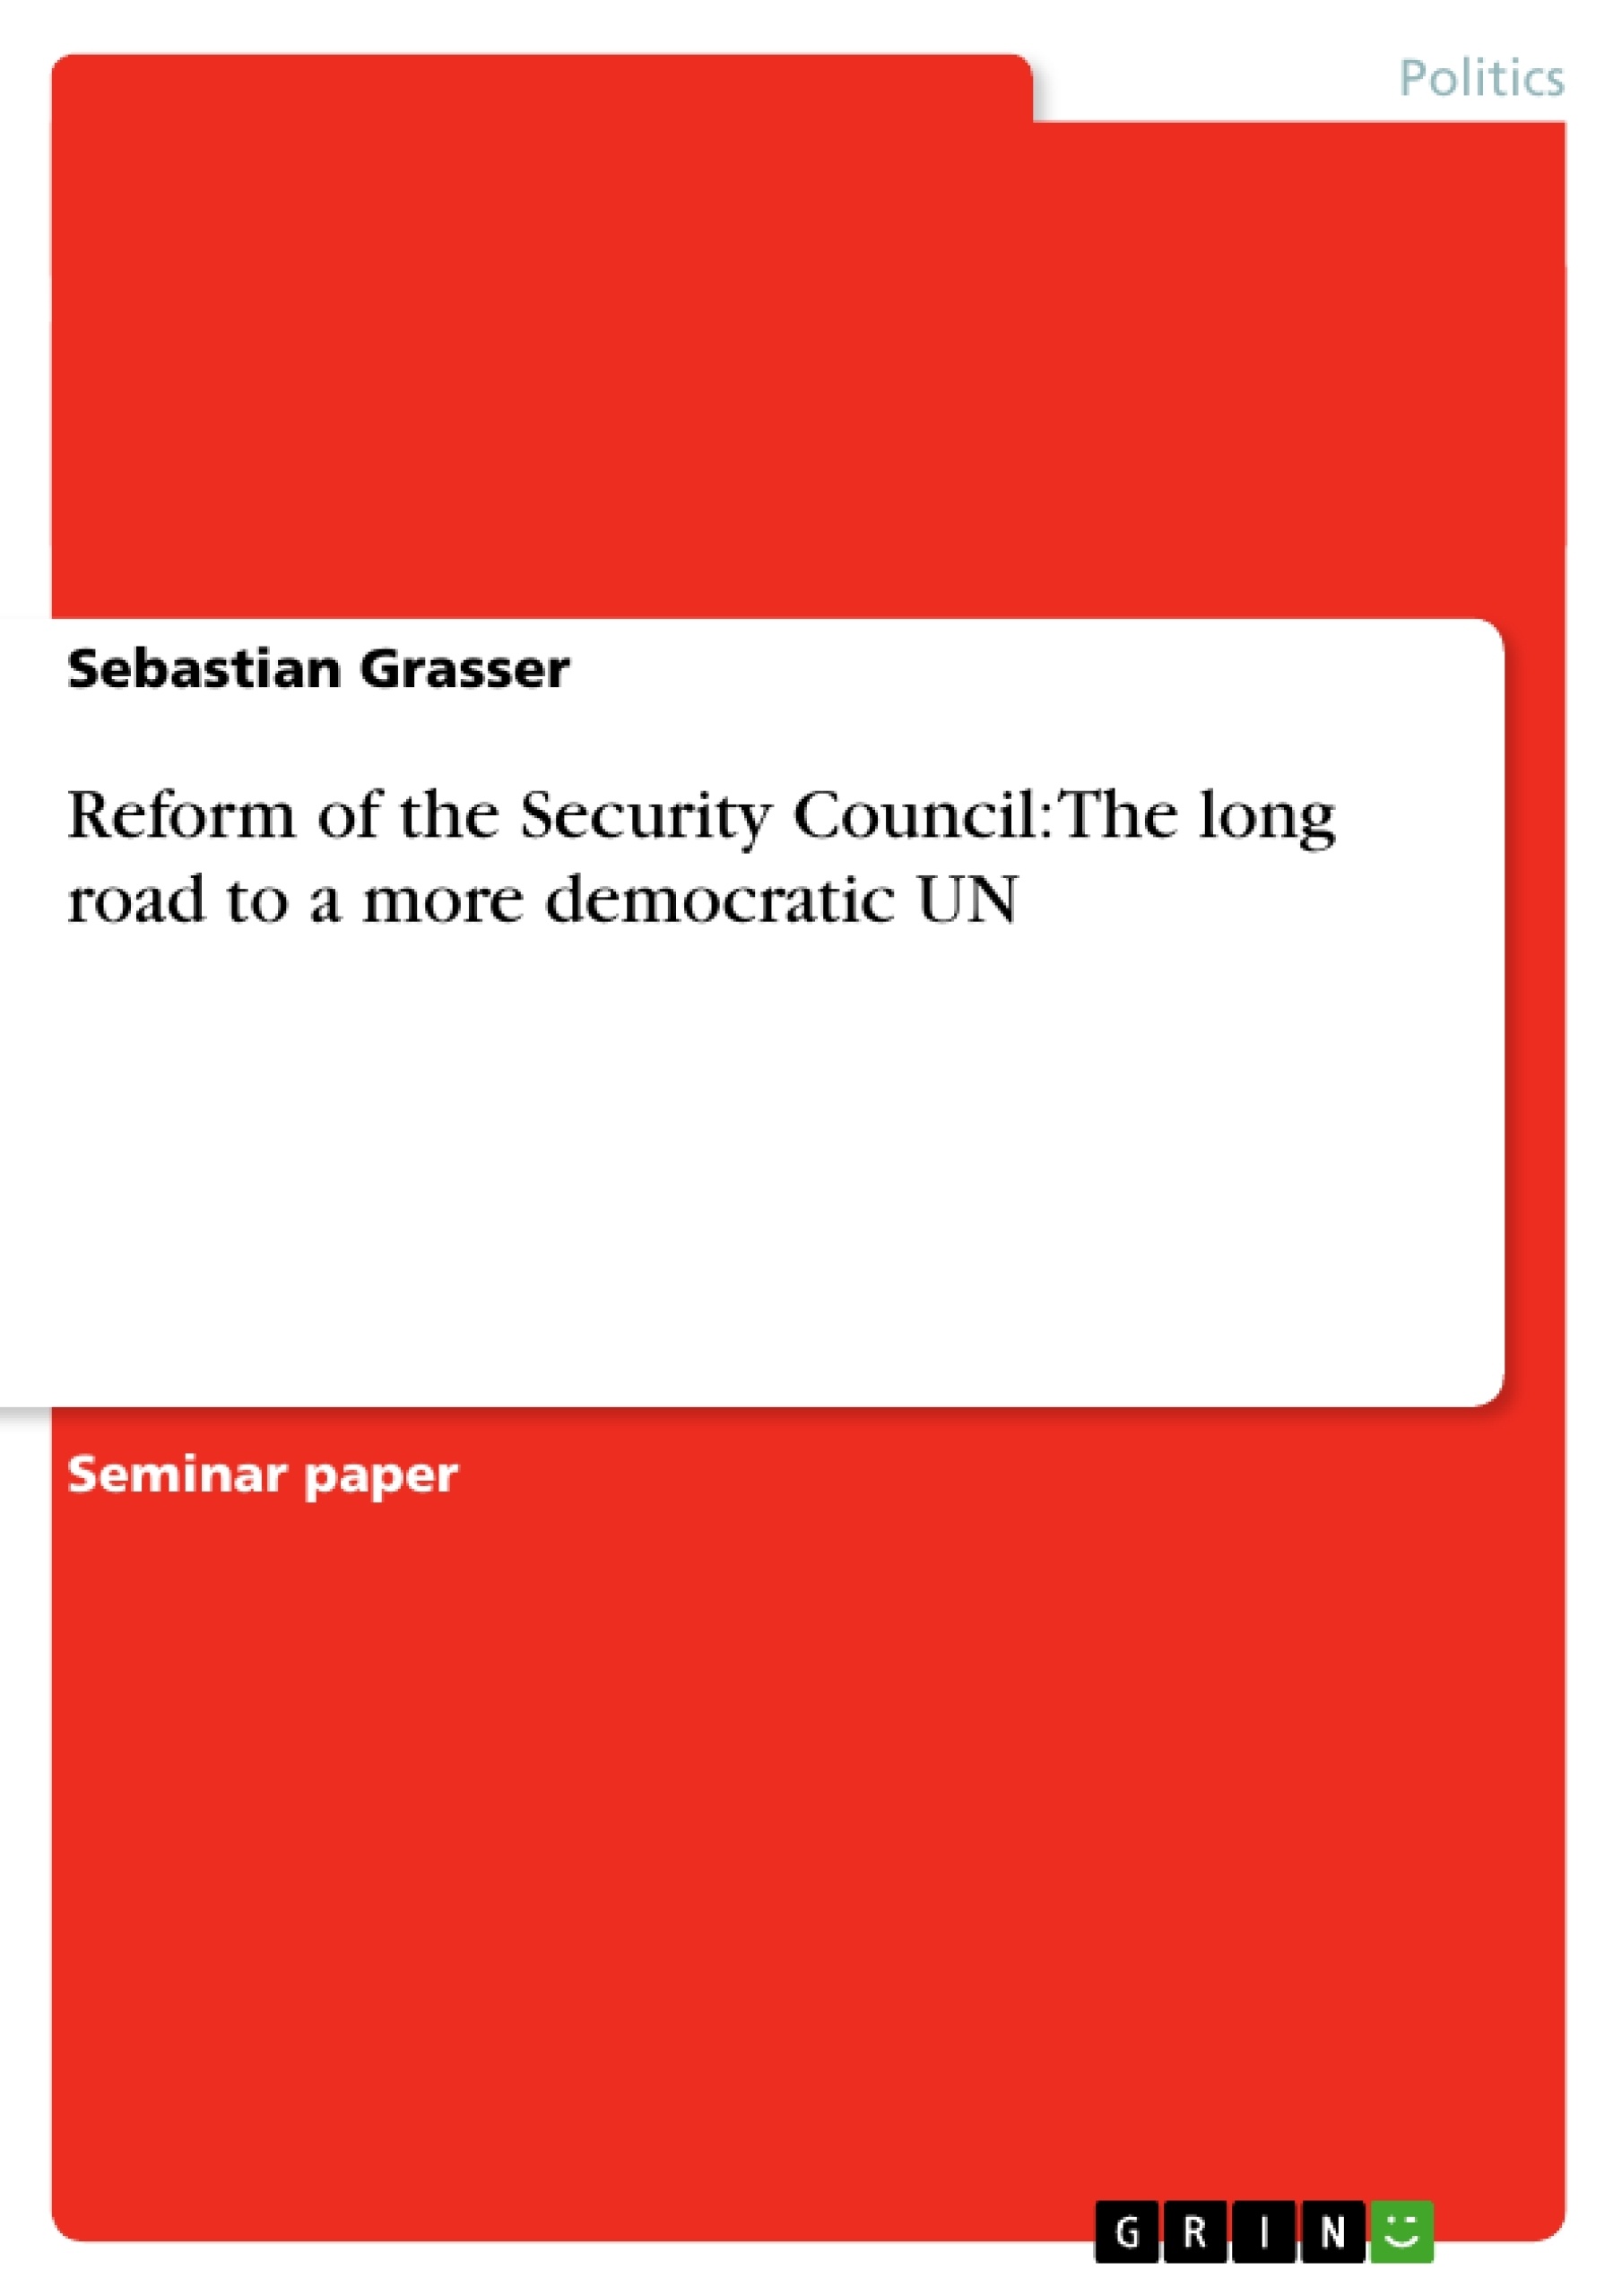 Título: Reform of the Security Council: The long road to a more democratic UN